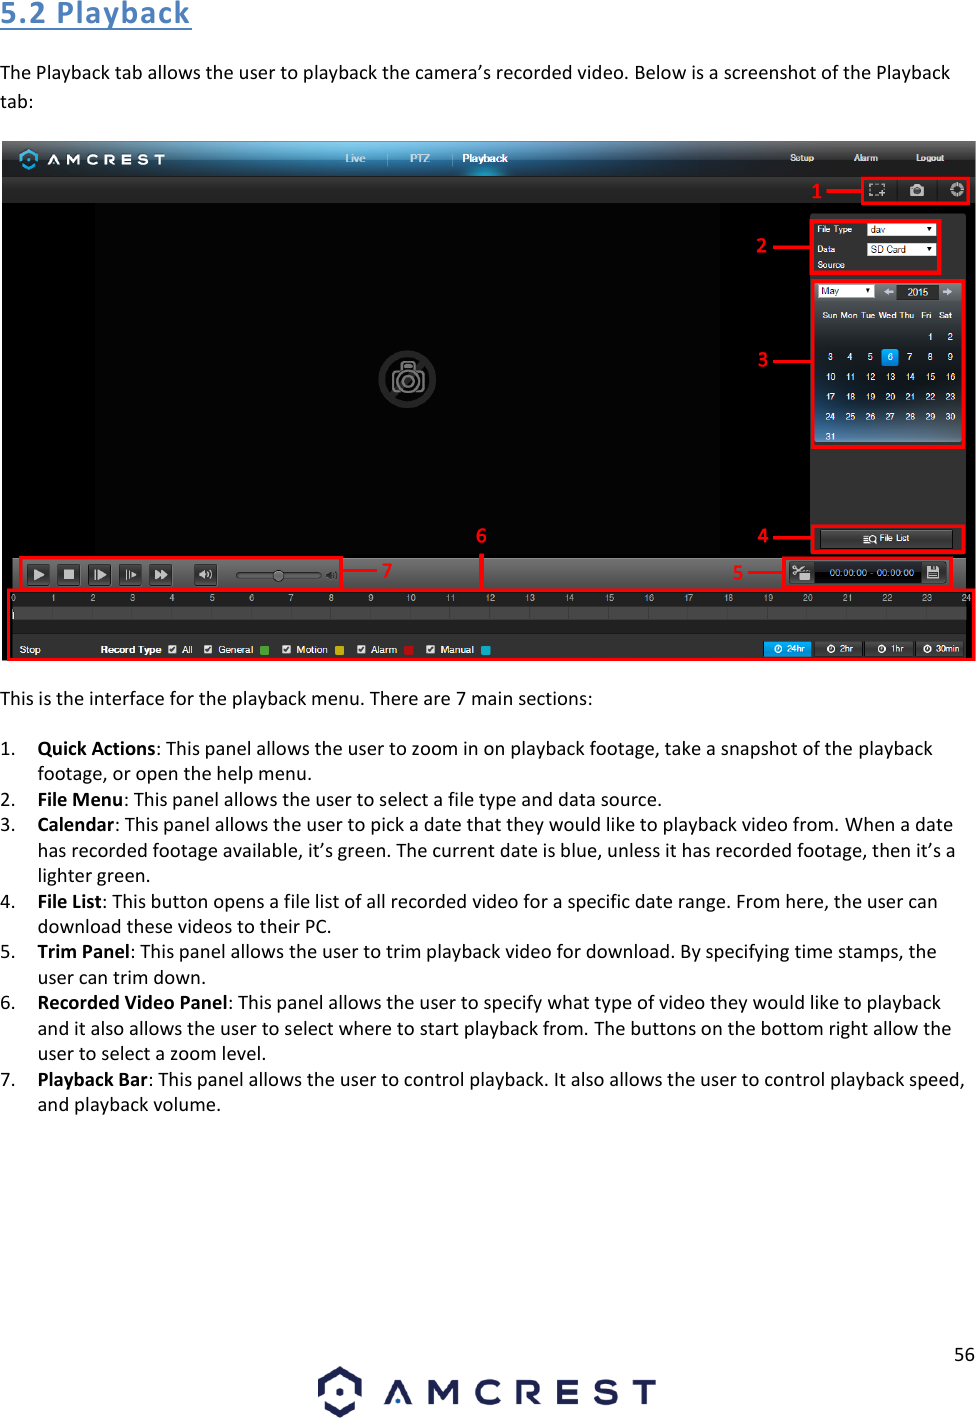 56  5.2 Playback The Playback tab allows the user to playback the camera’s recorded video. Below is a screenshot of the Playback tab:  This is the interface for the playback menu. There are 7 main sections: 1. Quick Actions: This panel allows the user to zoom in on playback footage, take a snapshot of the playback footage, or open the help menu. 2. File Menu: This panel allows the user to select a file type and data source. 3. Calendar: This panel allows the user to pick a date that they would like to playback video from. When a date has recorded footage available, it’s green. The current date is blue, unless it has recorded footage, then it’s a lighter green. 4. File List: This button opens a file list of all recorded video for a specific date range. From here, the user can download these videos to their PC. 5. Trim Panel: This panel allows the user to trim playback video for download. By specifying time stamps, the user can trim down.  6. Recorded Video Panel: This panel allows the user to specify what type of video they would like to playback and it also allows the user to select where to start playback from. The buttons on the bottom right allow the user to select a zoom level. 7. Playback Bar: This panel allows the user to control playback. It also allows the user to control playback speed, and playback volume. 